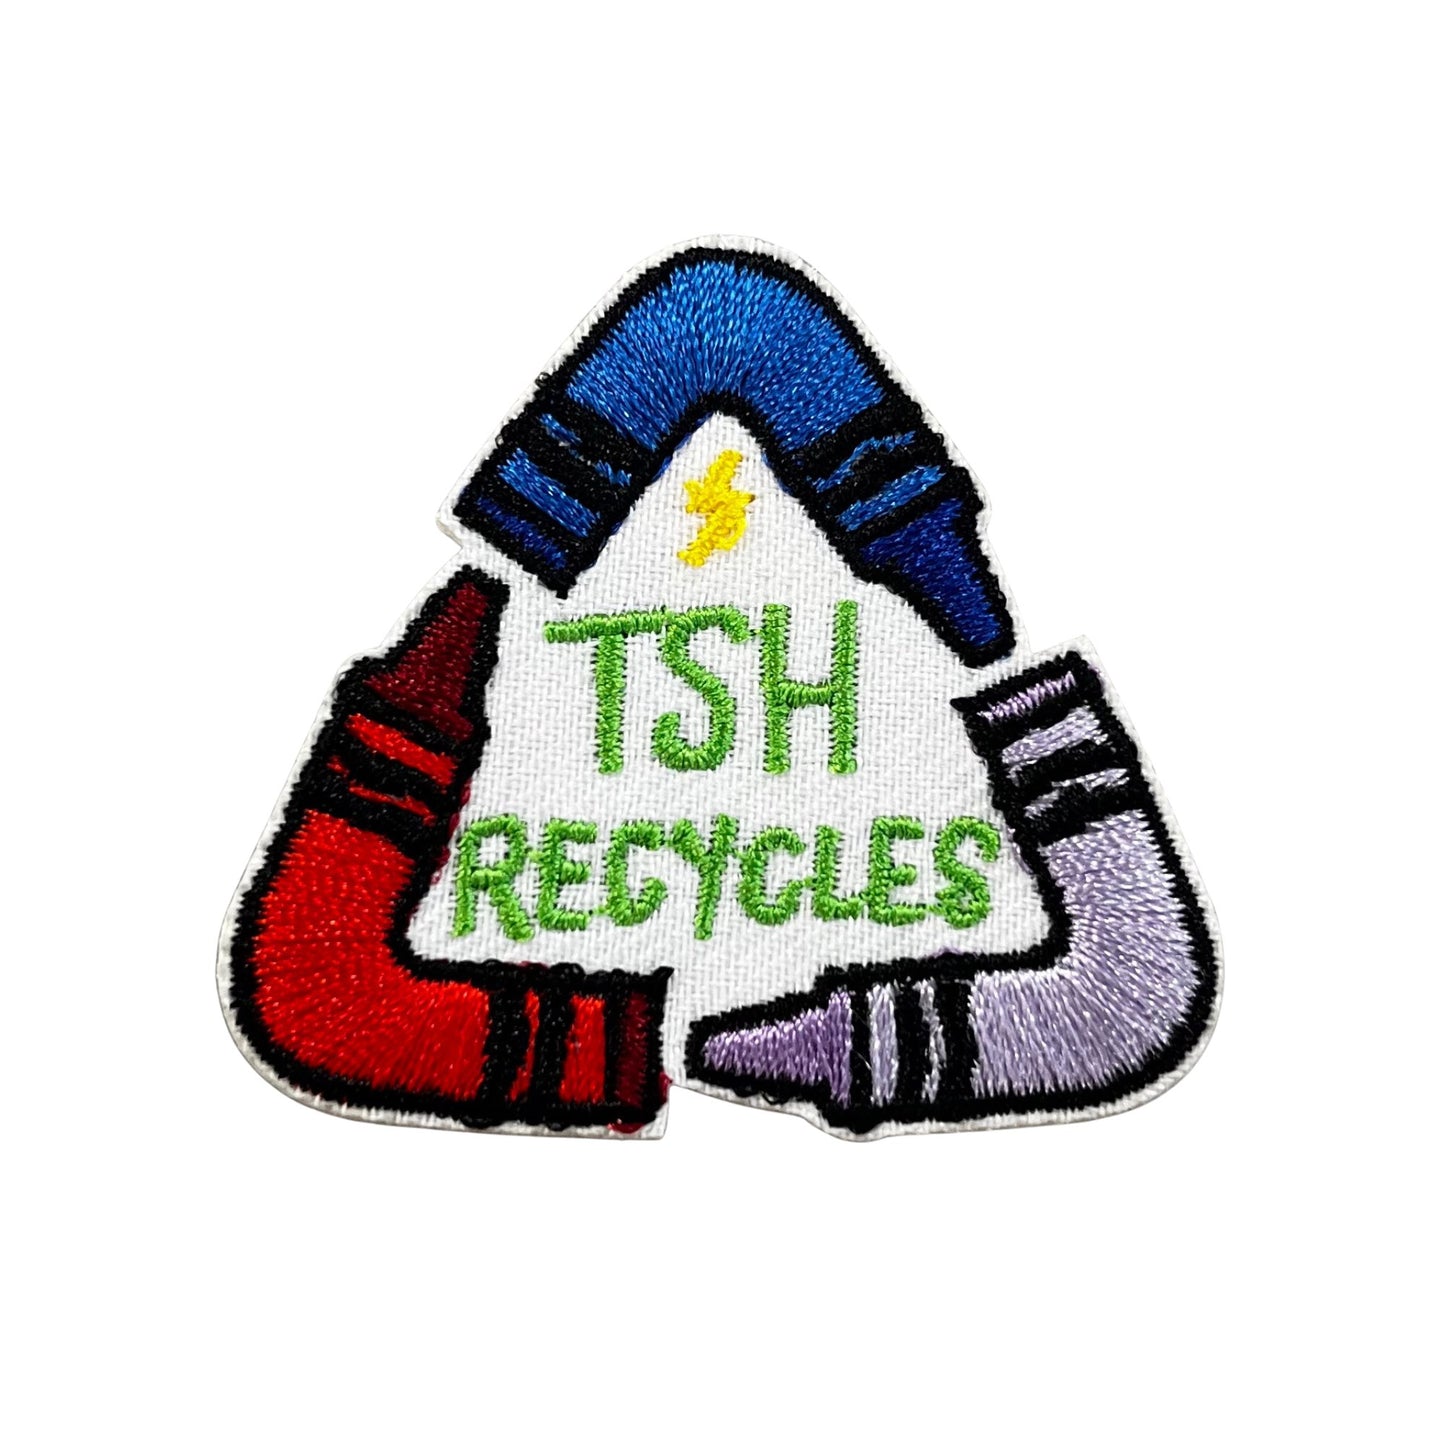 Recycle Patch (Recycle Mission - October '23)